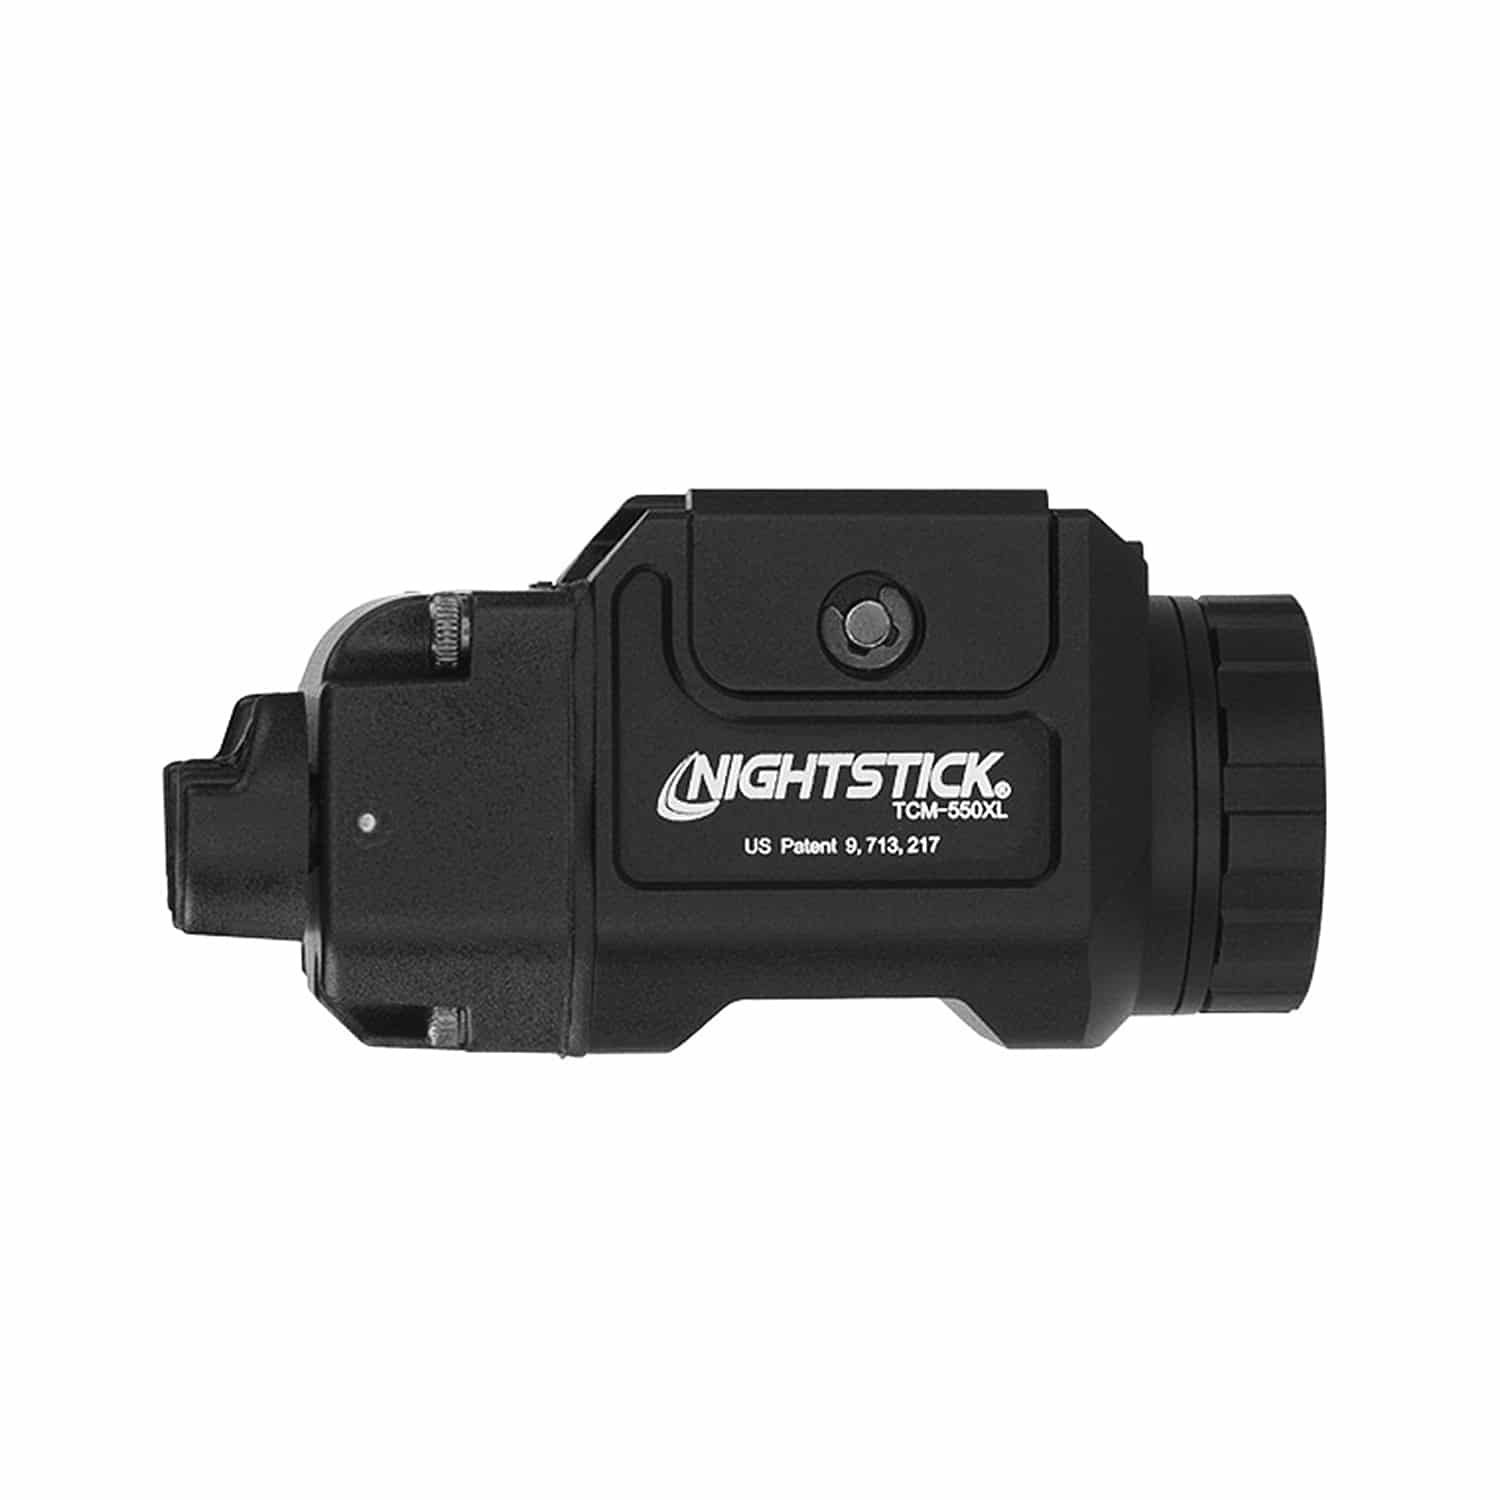 NightStick TCM-550XLS Weapon Mounted Light for sale online 